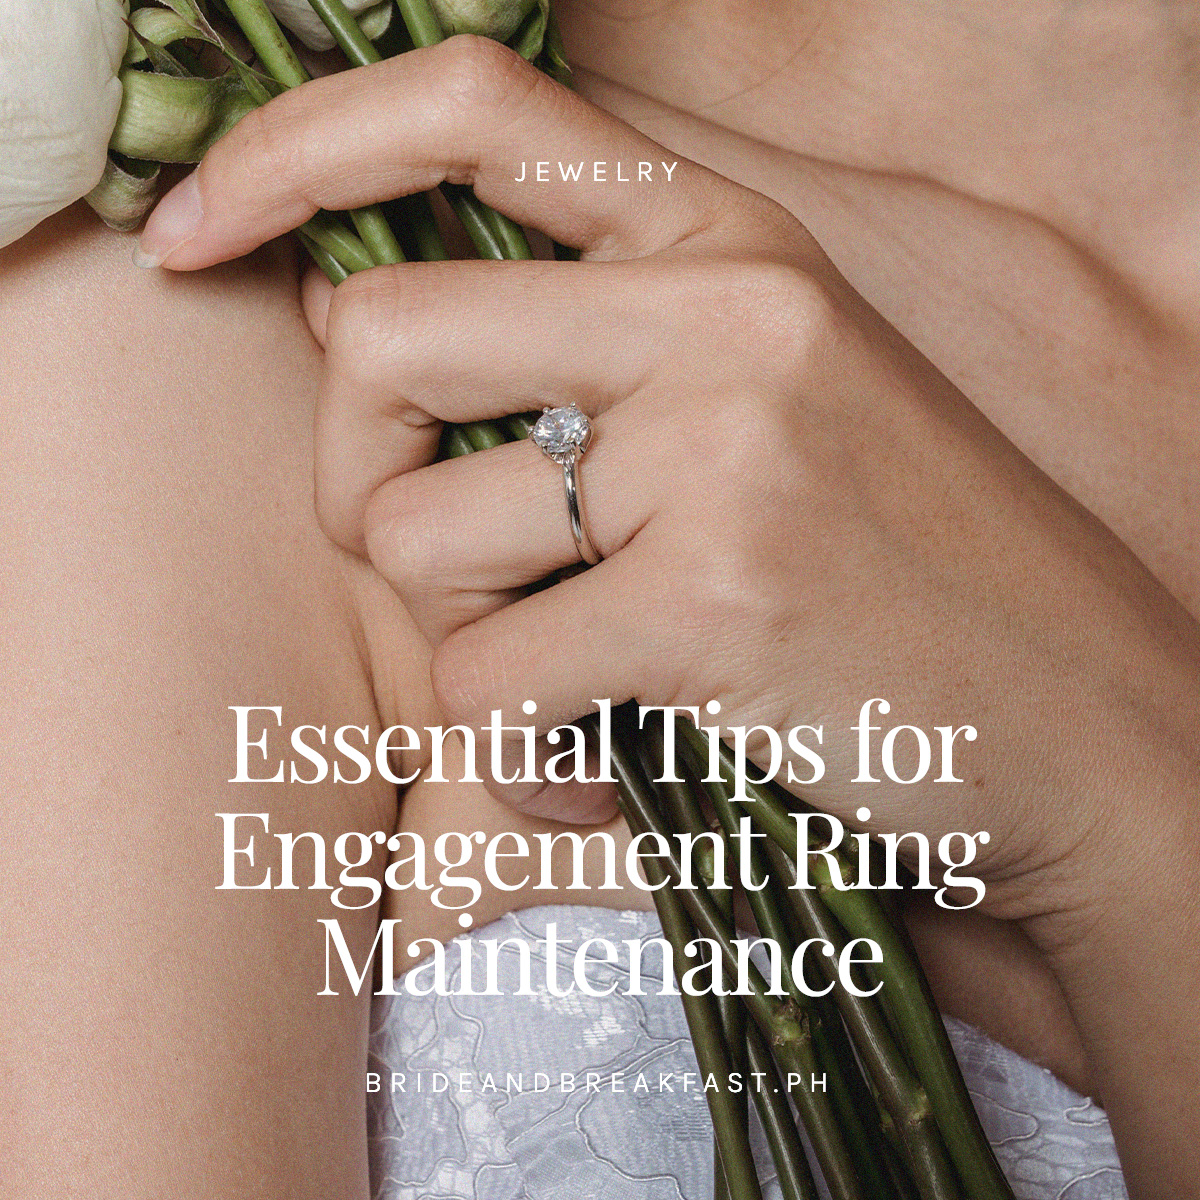 Essential Tips for Engagement Ring Maintenance